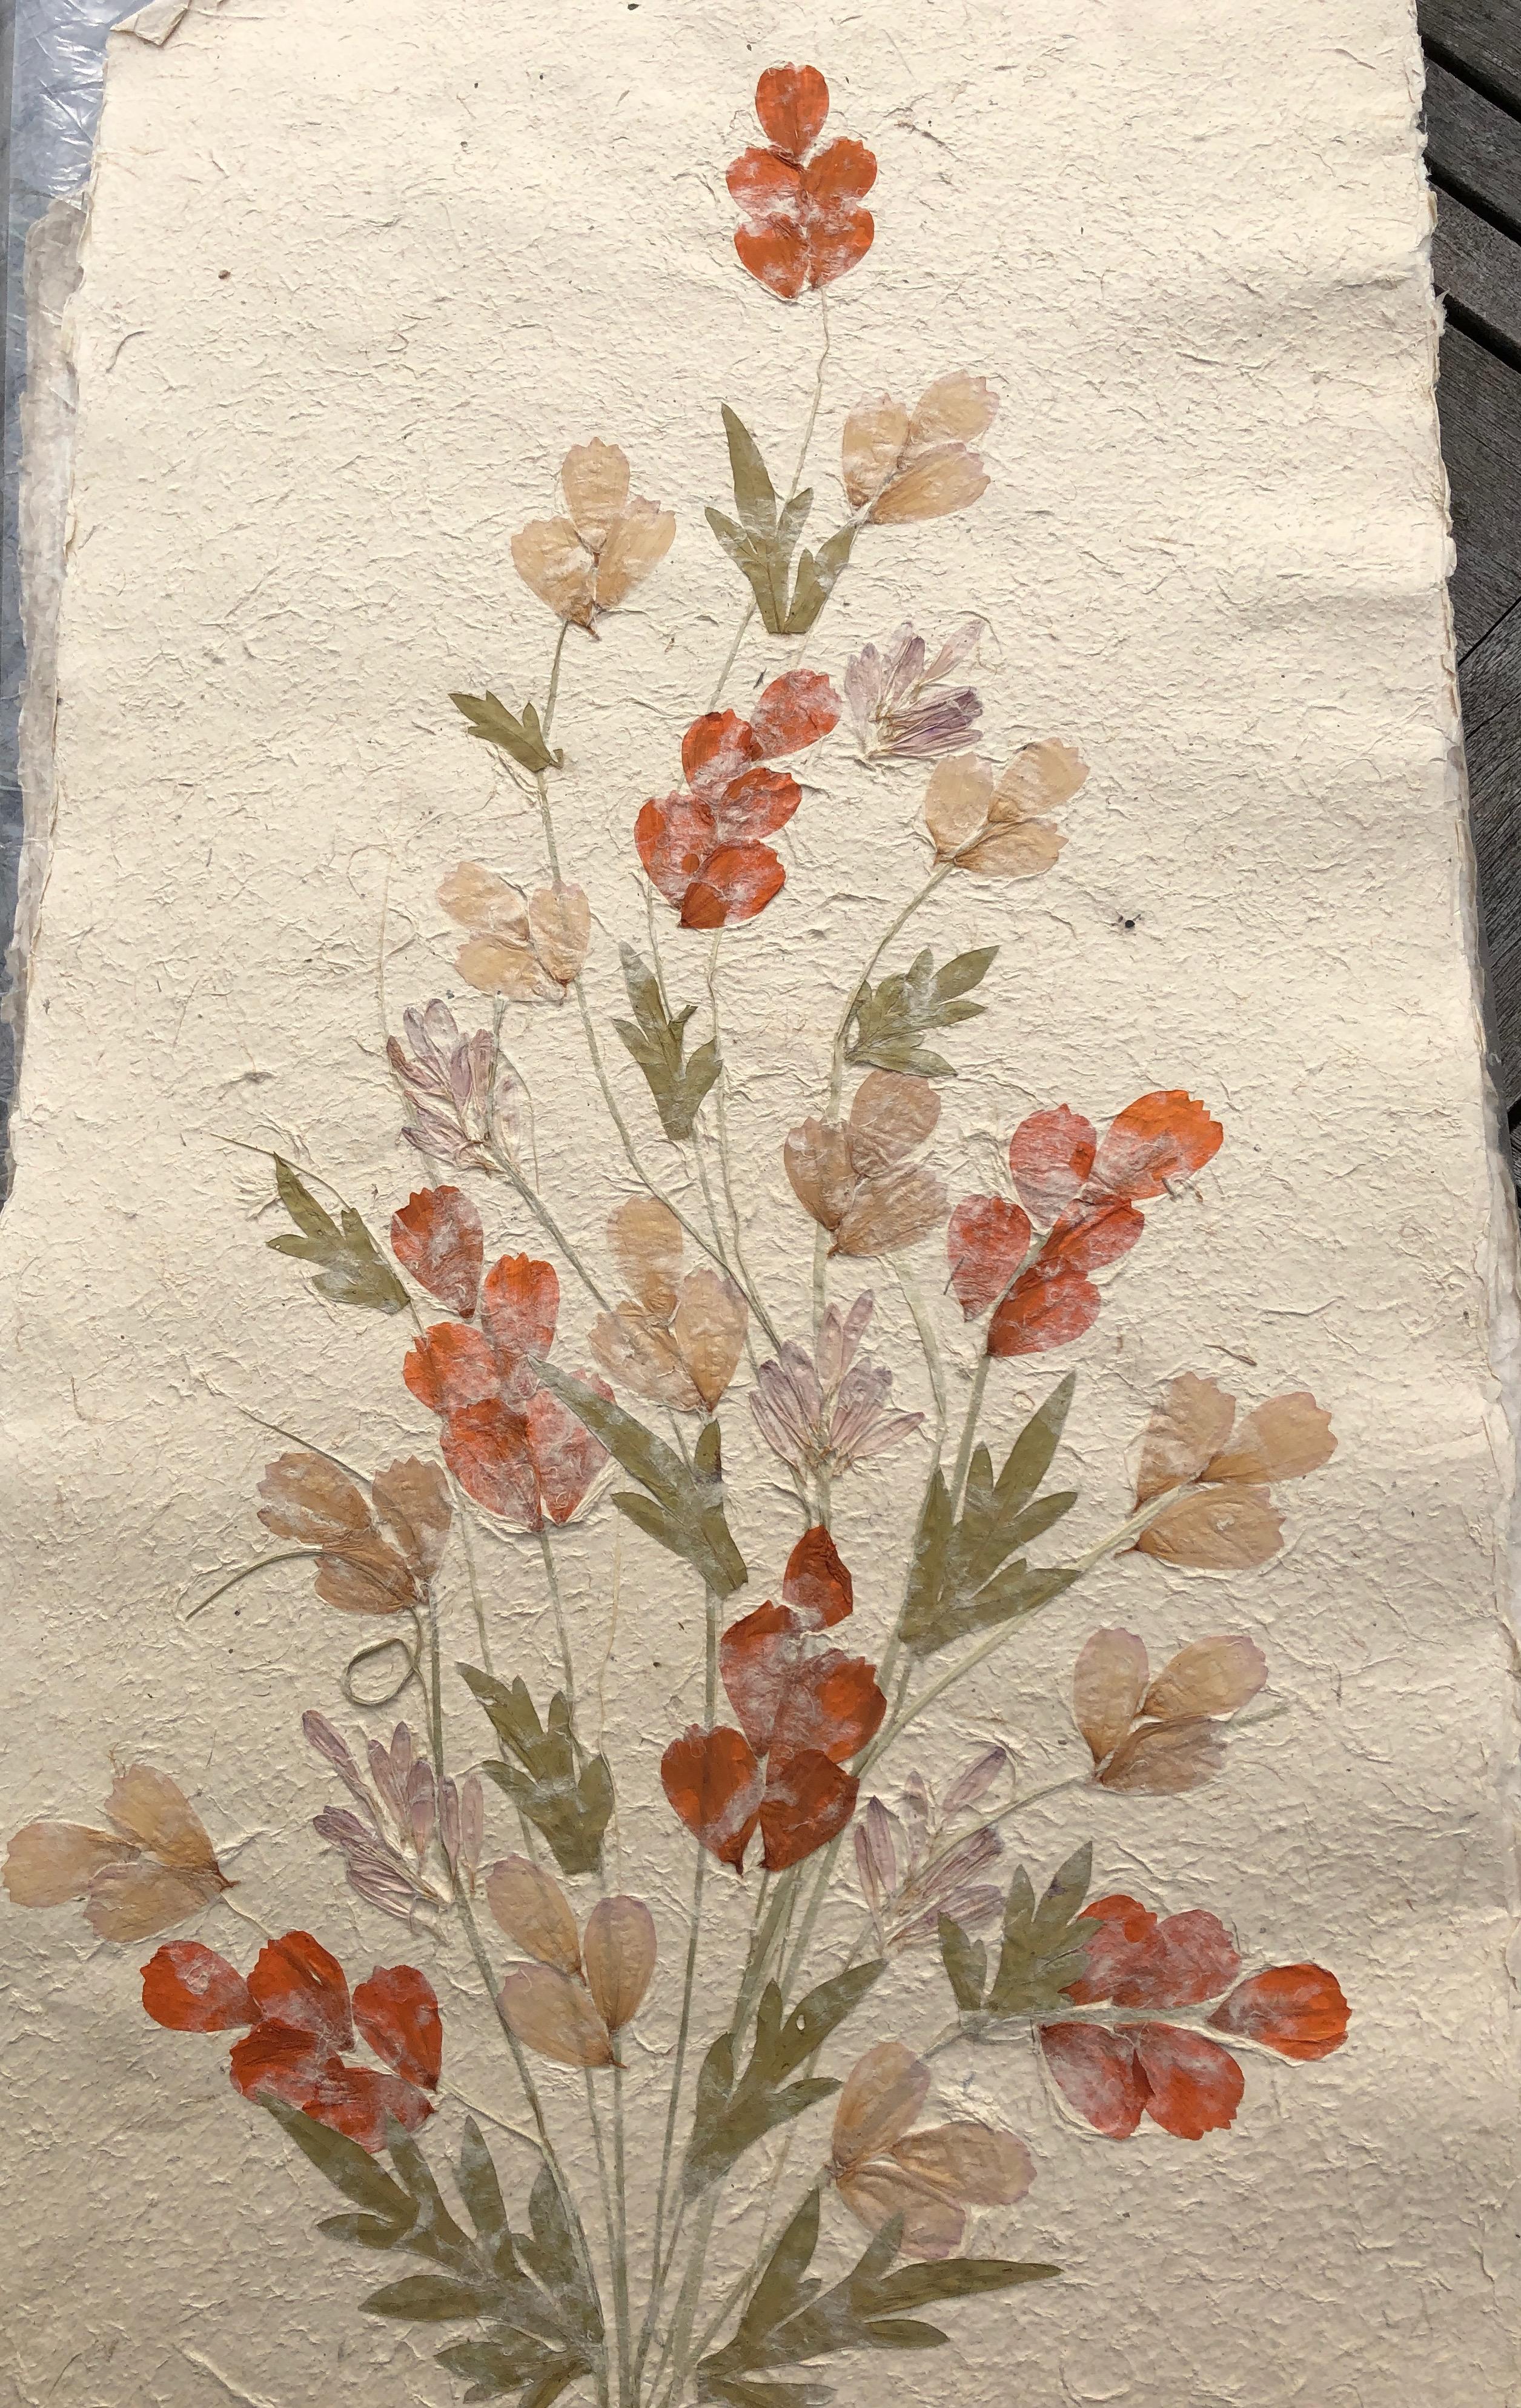 Madagascan Dried Flowers On Hand Made Paper - Mixed Media Art by Unknown